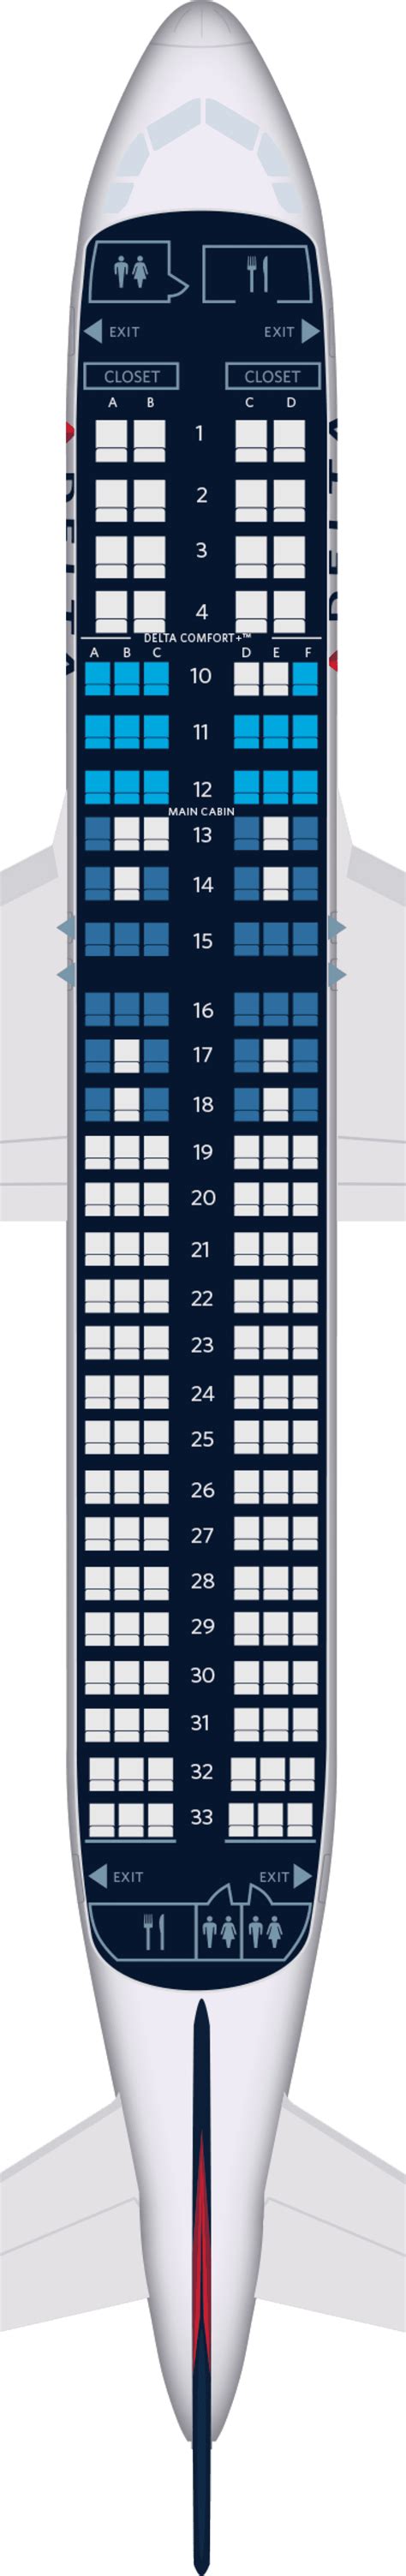 Airbus 320 seat plan. Overview. This British Airways Airbus A320 is primarily operated on short-haul European routes. This A320 features a two class configuration with between 12-48 Club Europe seats and 96-150 Euro Traveller seats. The Club Europe seats are standard Euro Traveller seats with the middle seat blocked off. 